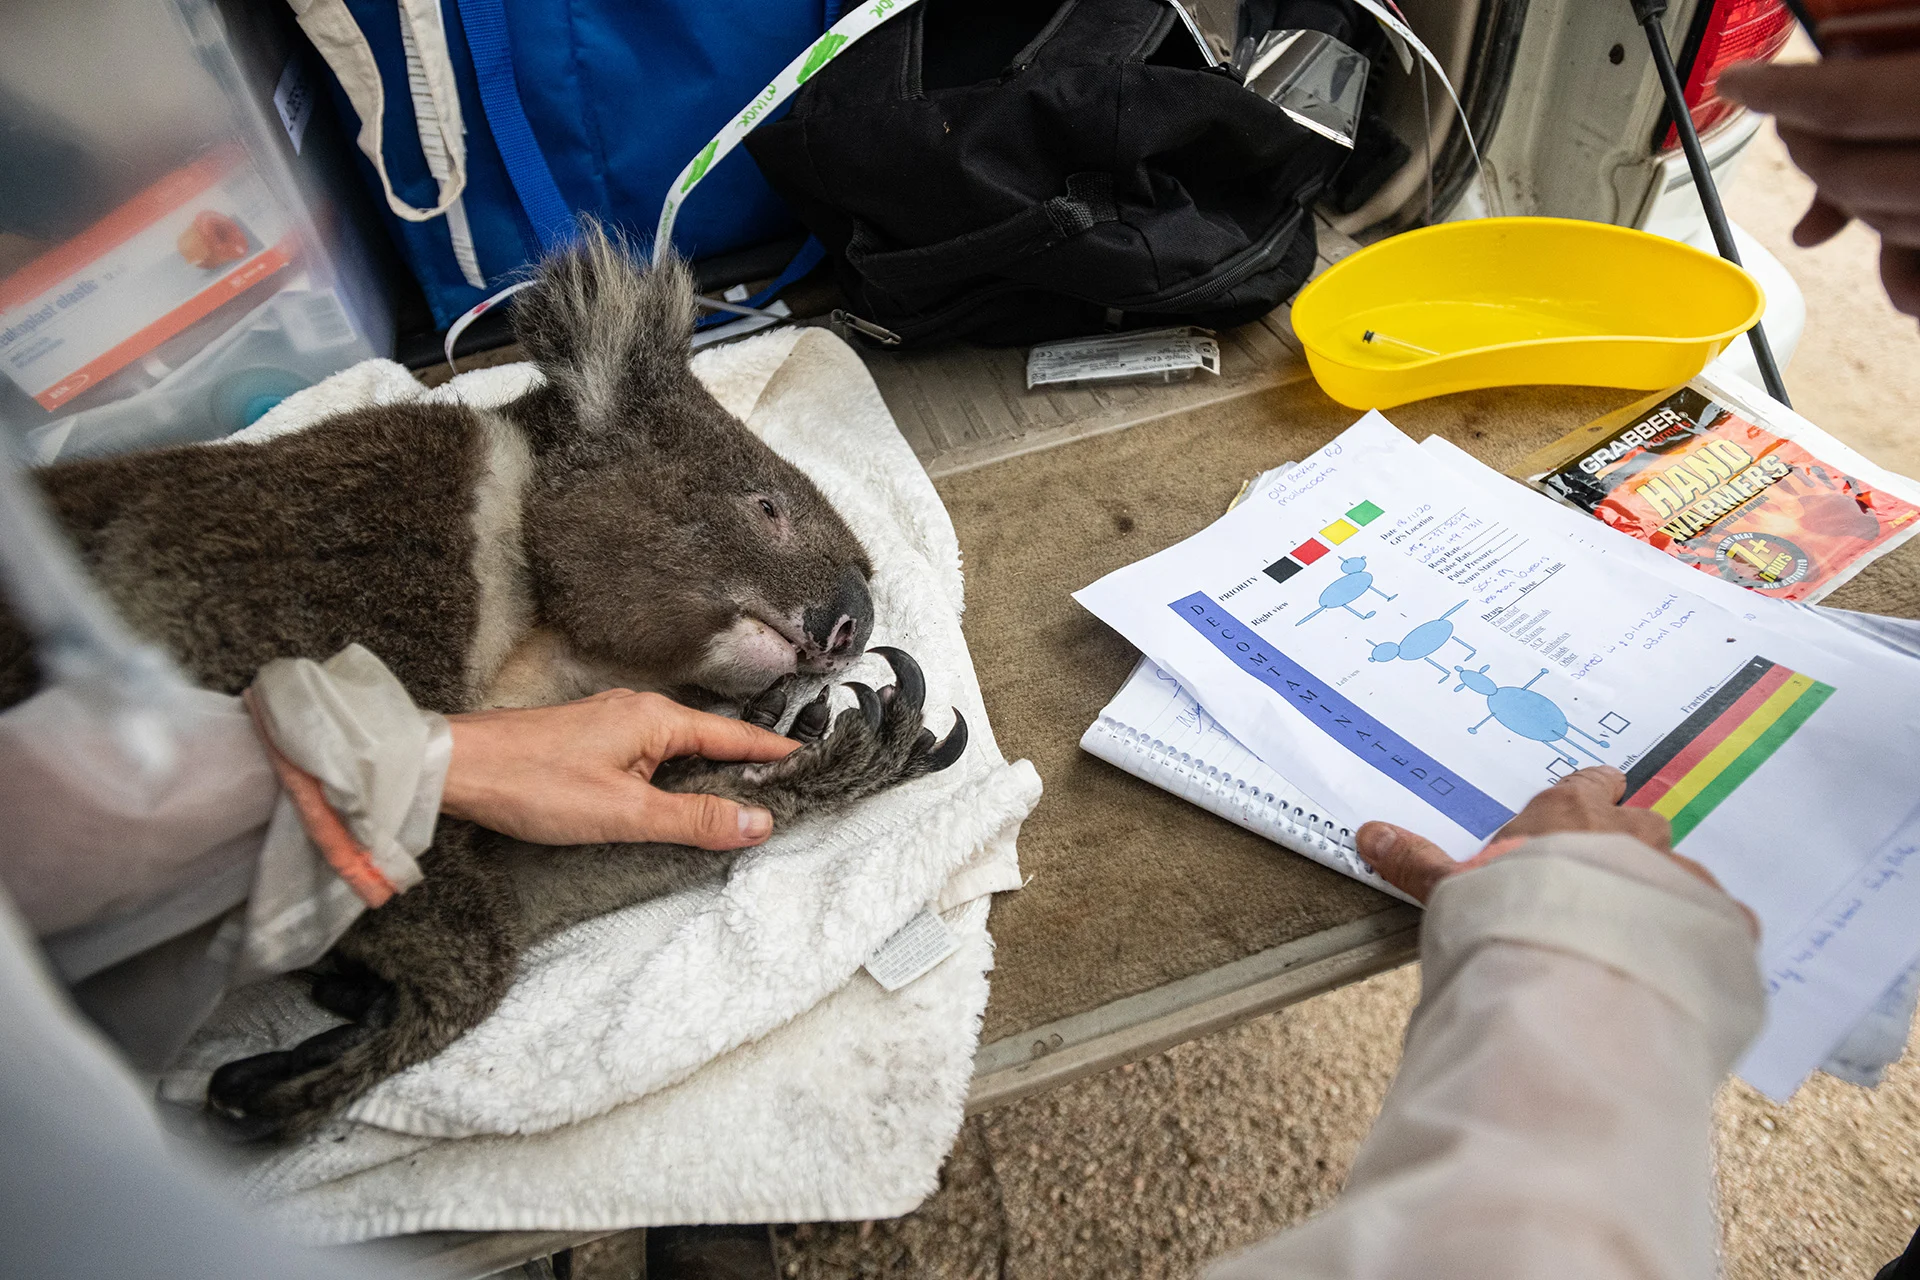 A dehydrated koala receives veterinary care. He will later be released into a surviving forest. Photo Credit: Jo-Anne McArthur/We Animals Media